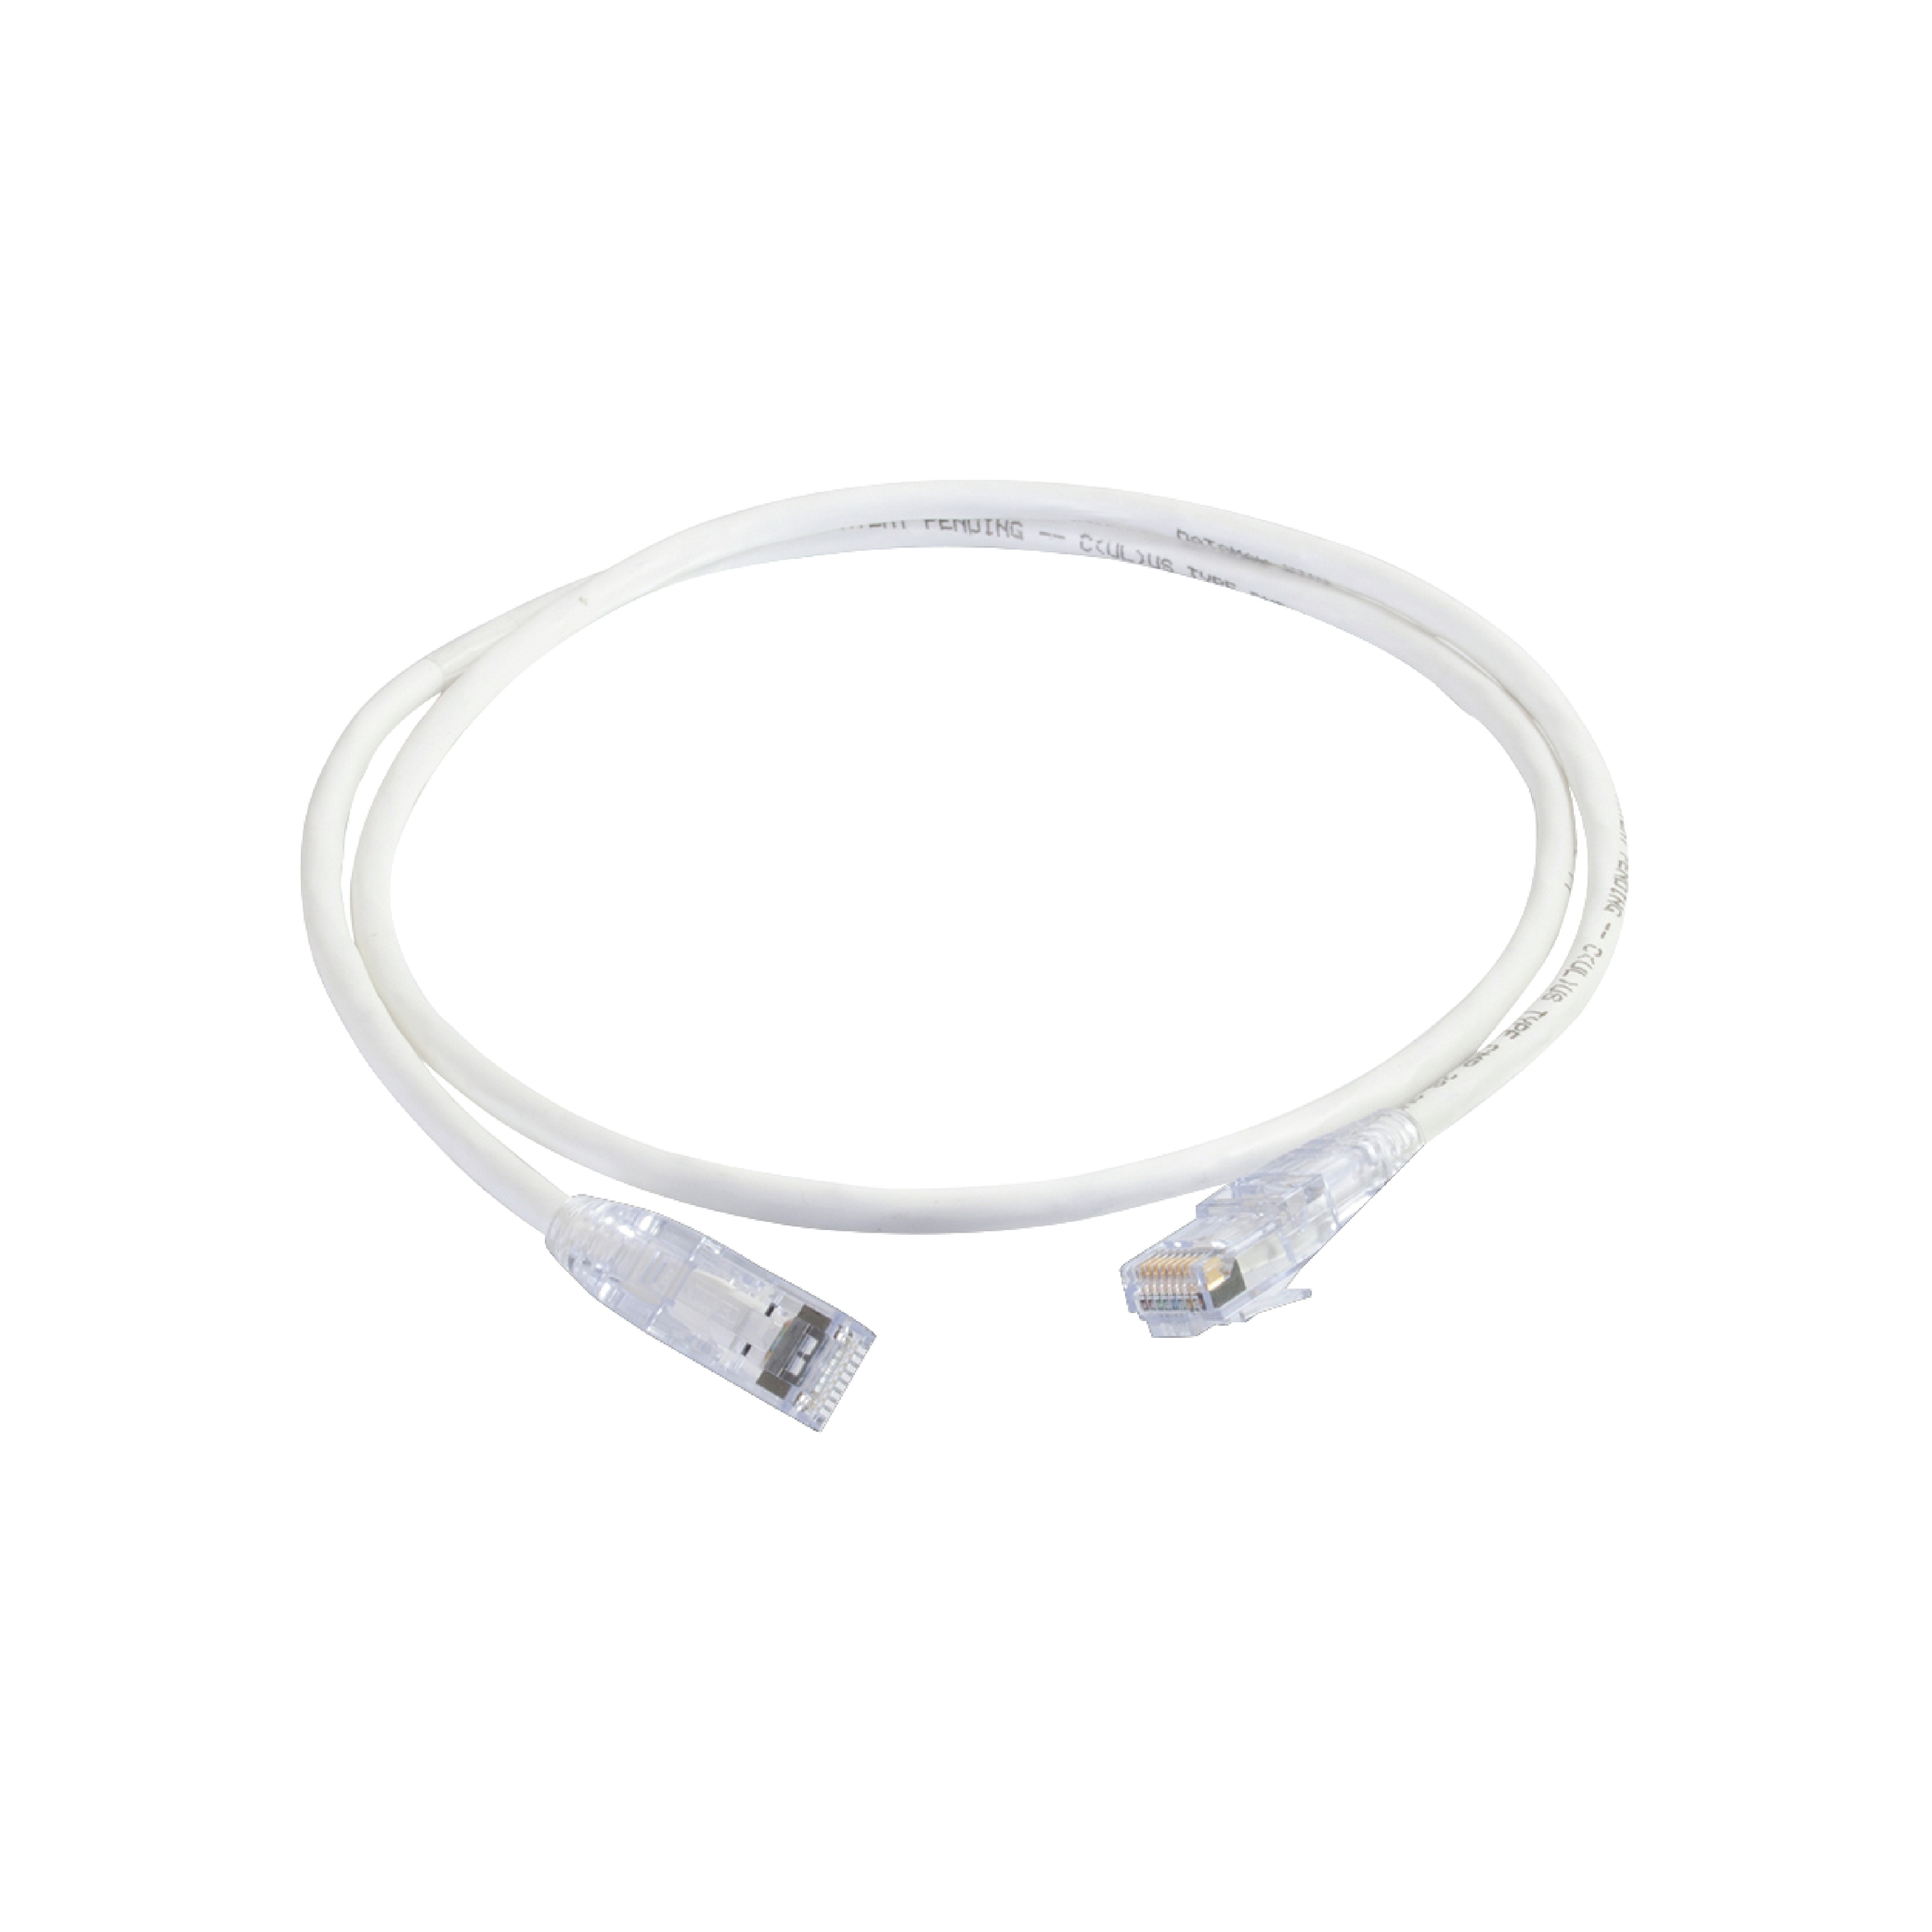 Structured Cabling Solution_Cable Boots_Patchcord Cable_White.jpg